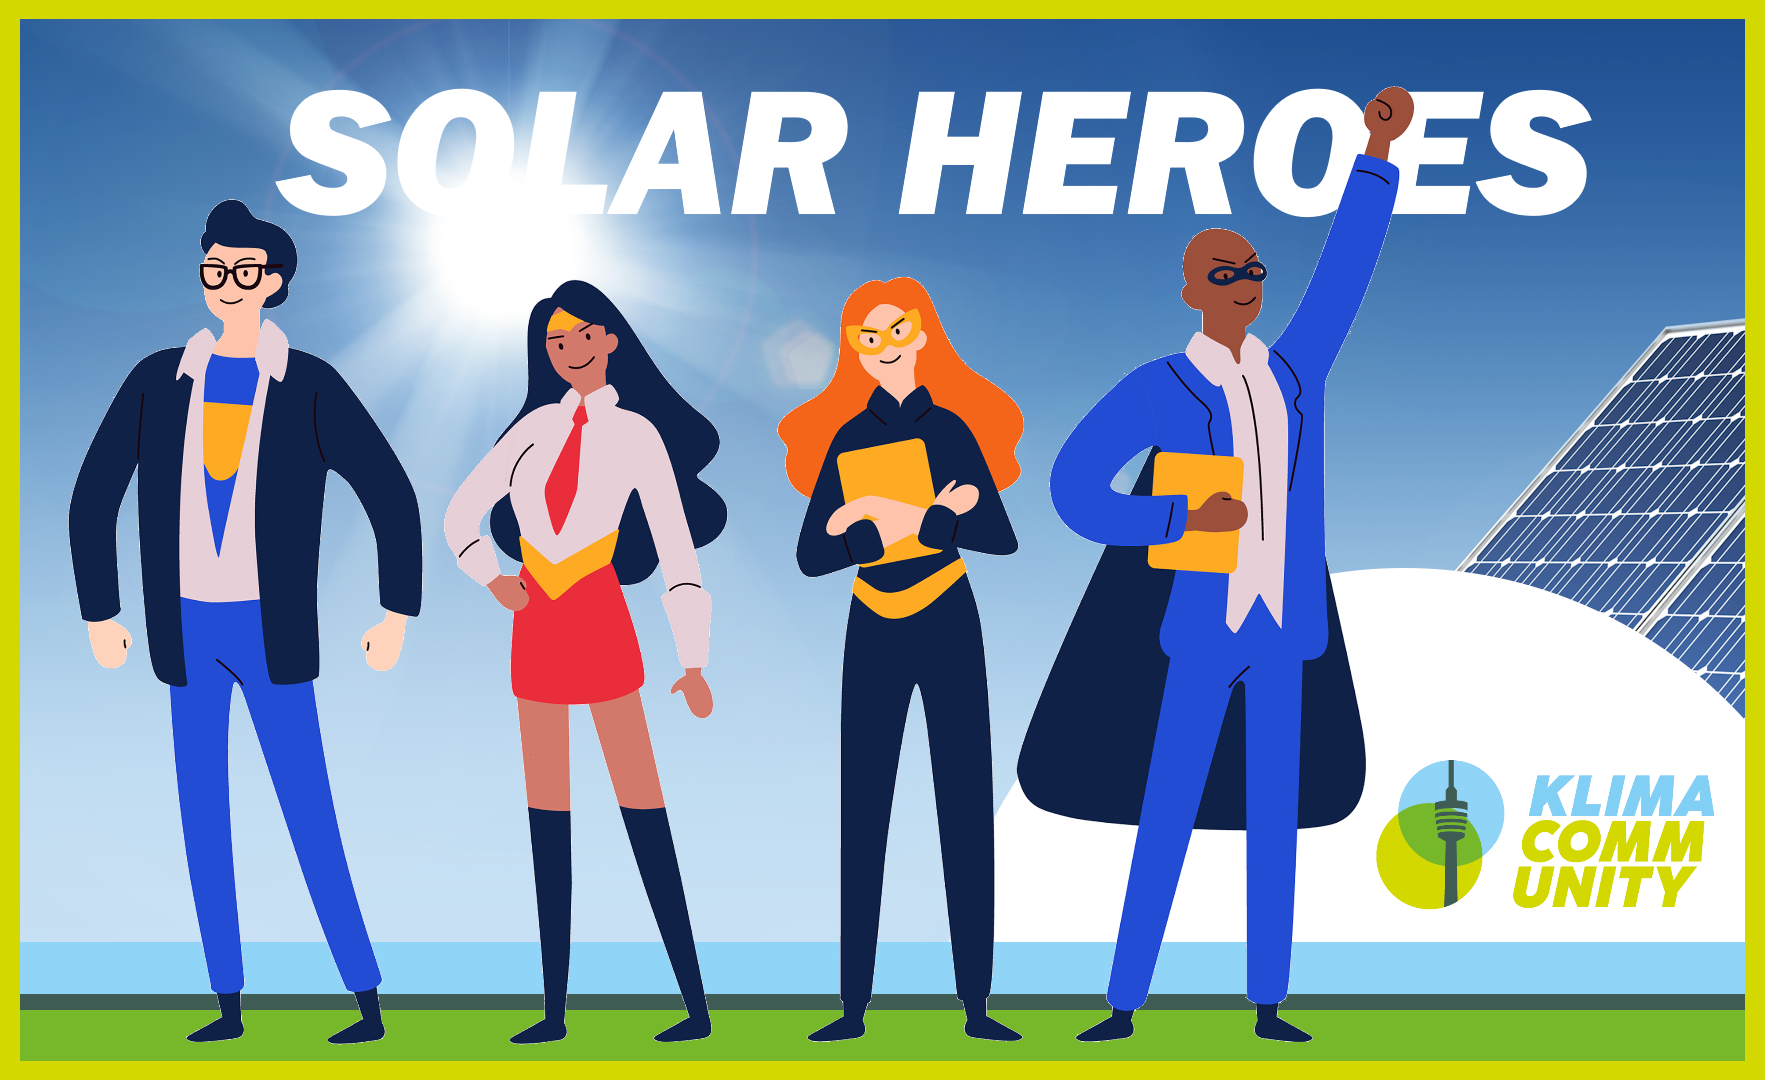 Become a Solar Hero! Offer from the Climate Community Stuttgart